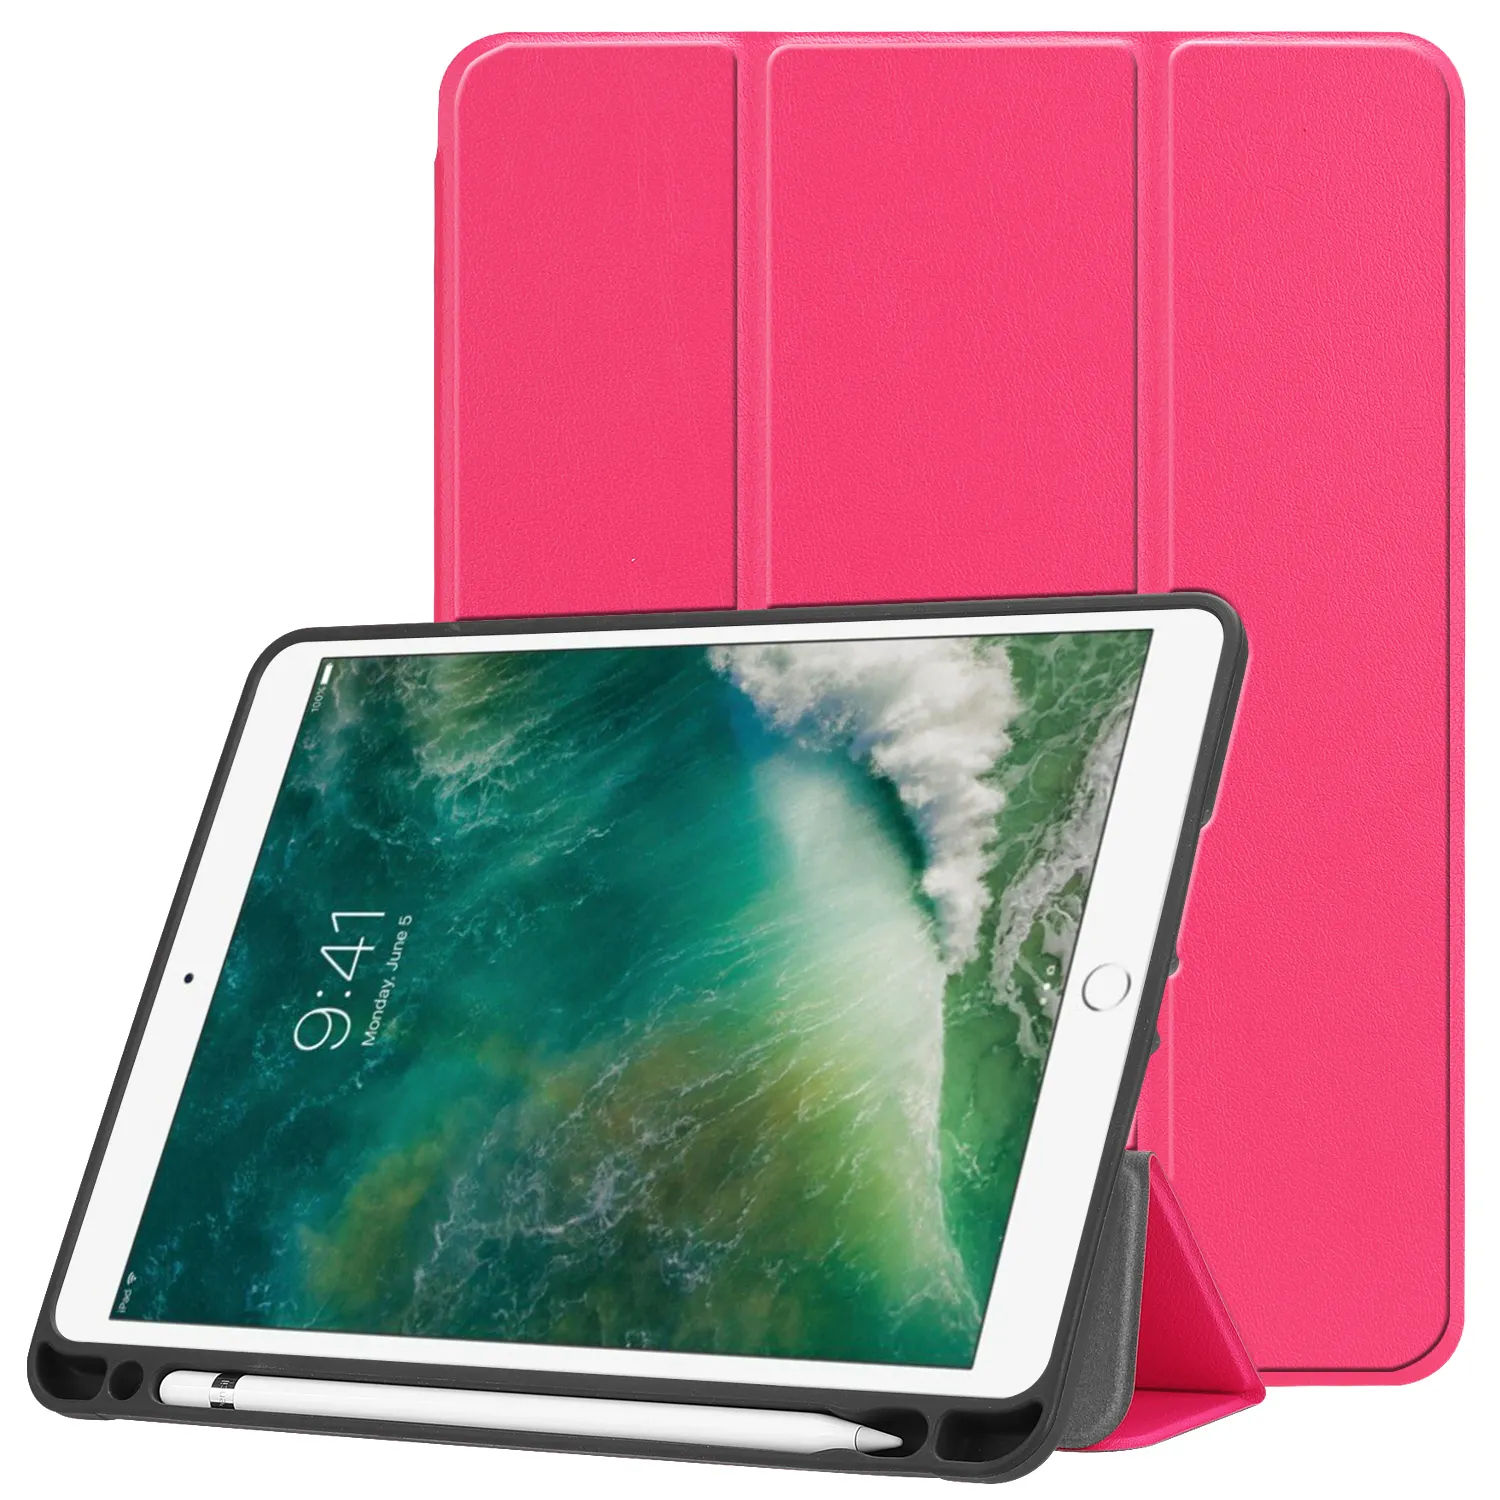 Universal Trifold Tablet Case Pu Leather 9.7 Inch TPU Tablet Cover With pen slot For Apple Ipad air 1/2 ipad 9.7 2017 2018